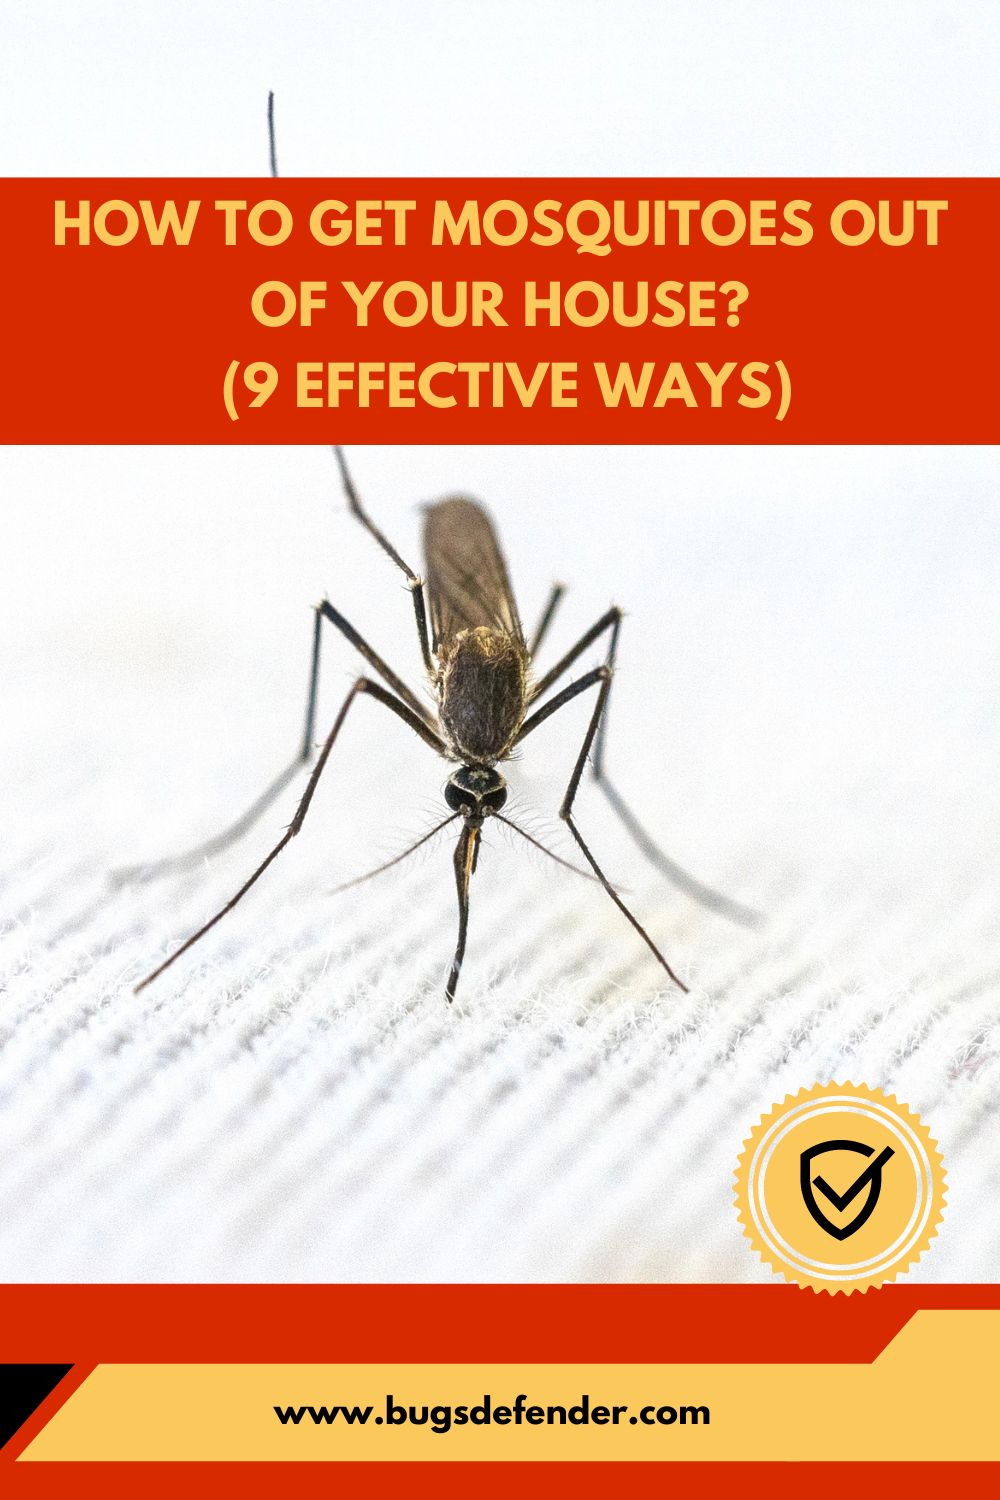 How To Get Mosquitoes Out Of Your House pin2